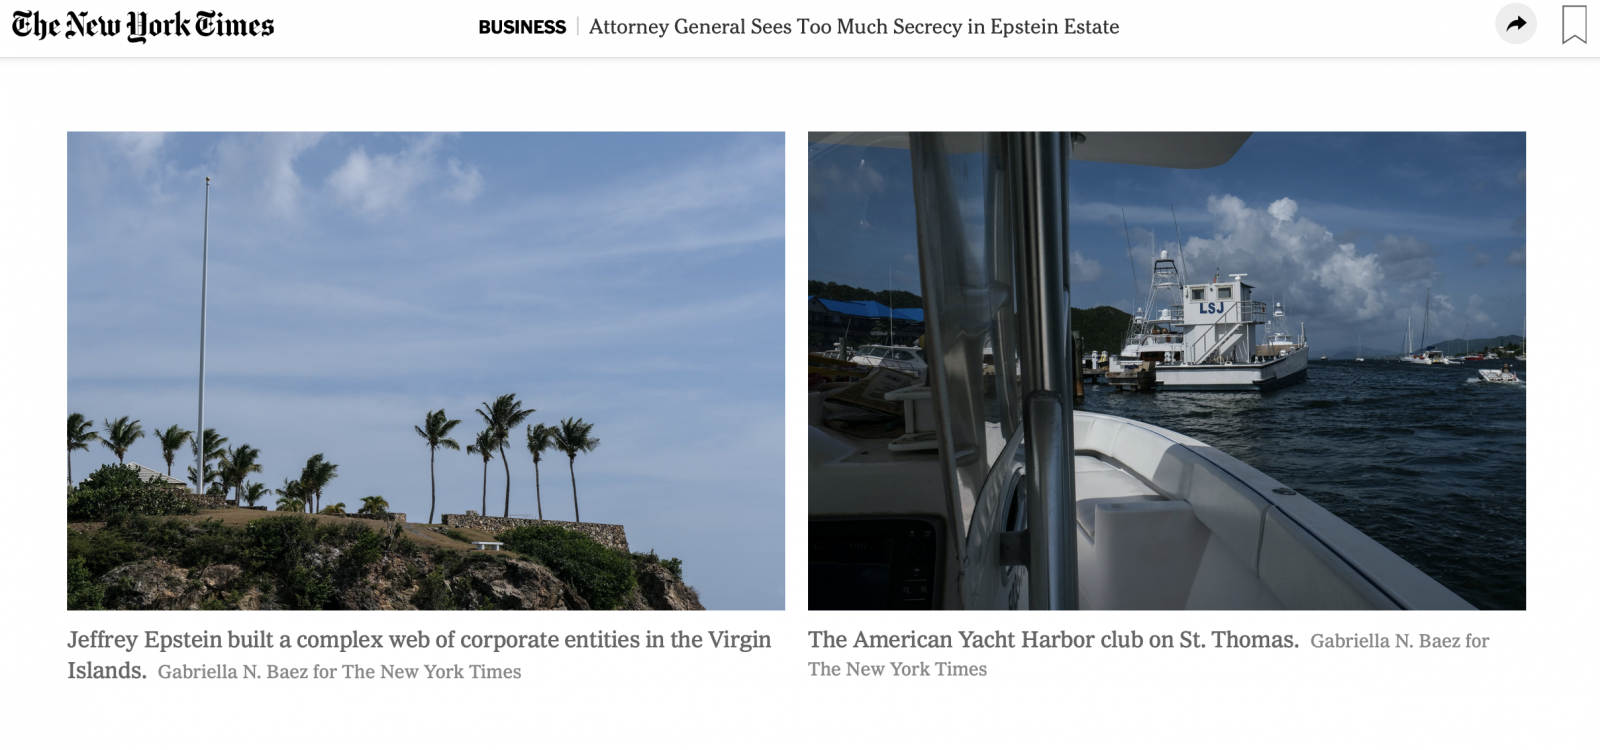 Attorney General of USVI Seeks Transparency on the Epstein Estate for NYT